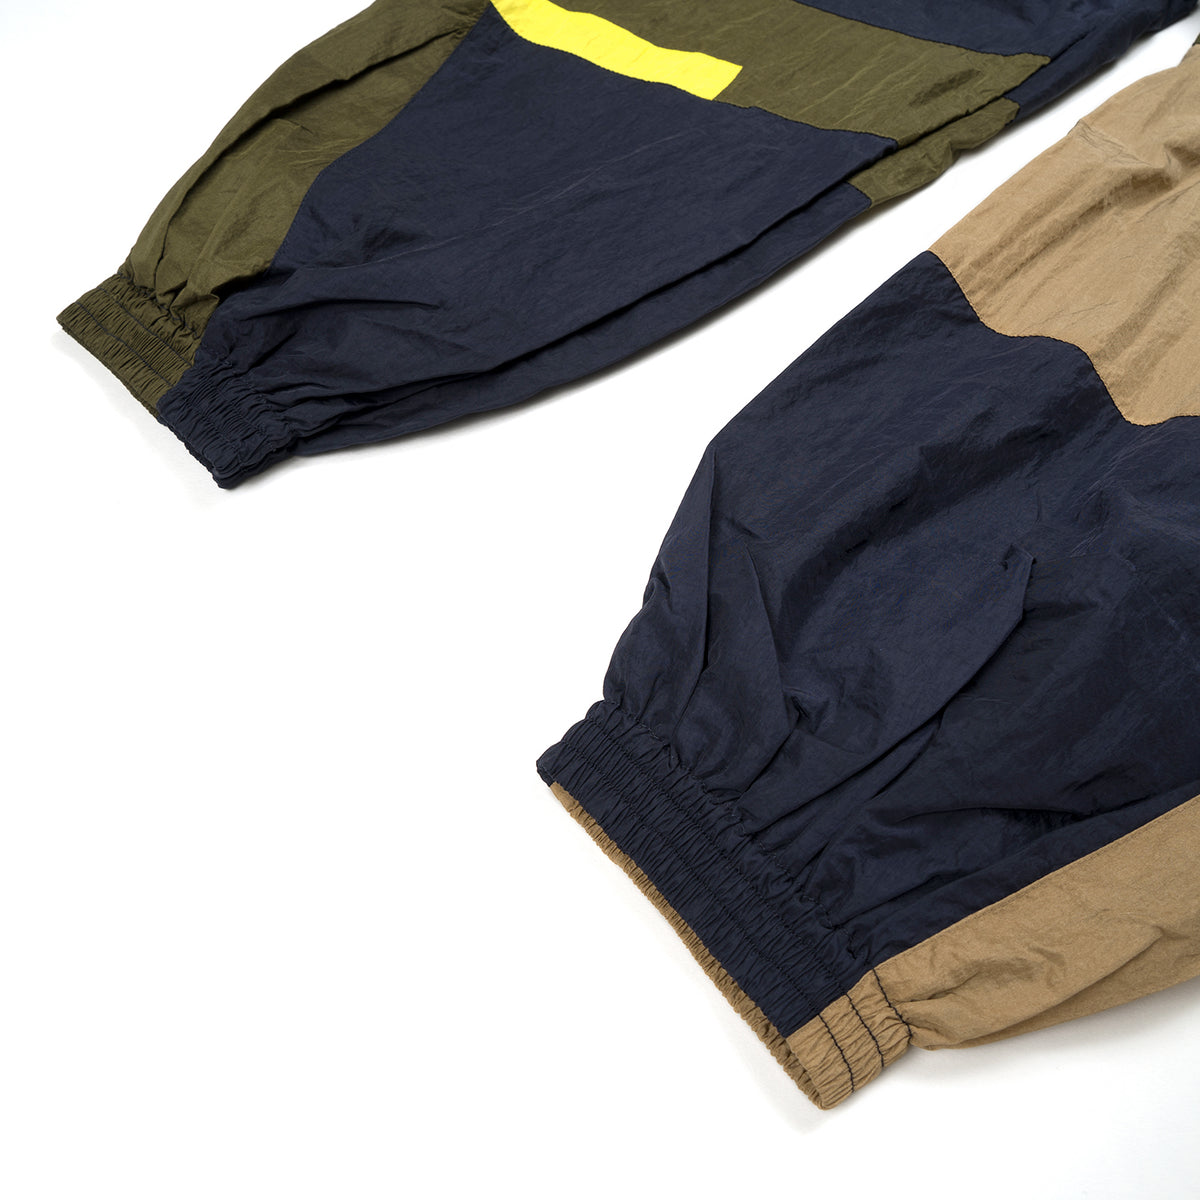 Perks and Mini (P.A.M.) | Over It's Shadow Sooth Track Pants Navy/Multi - Concrete